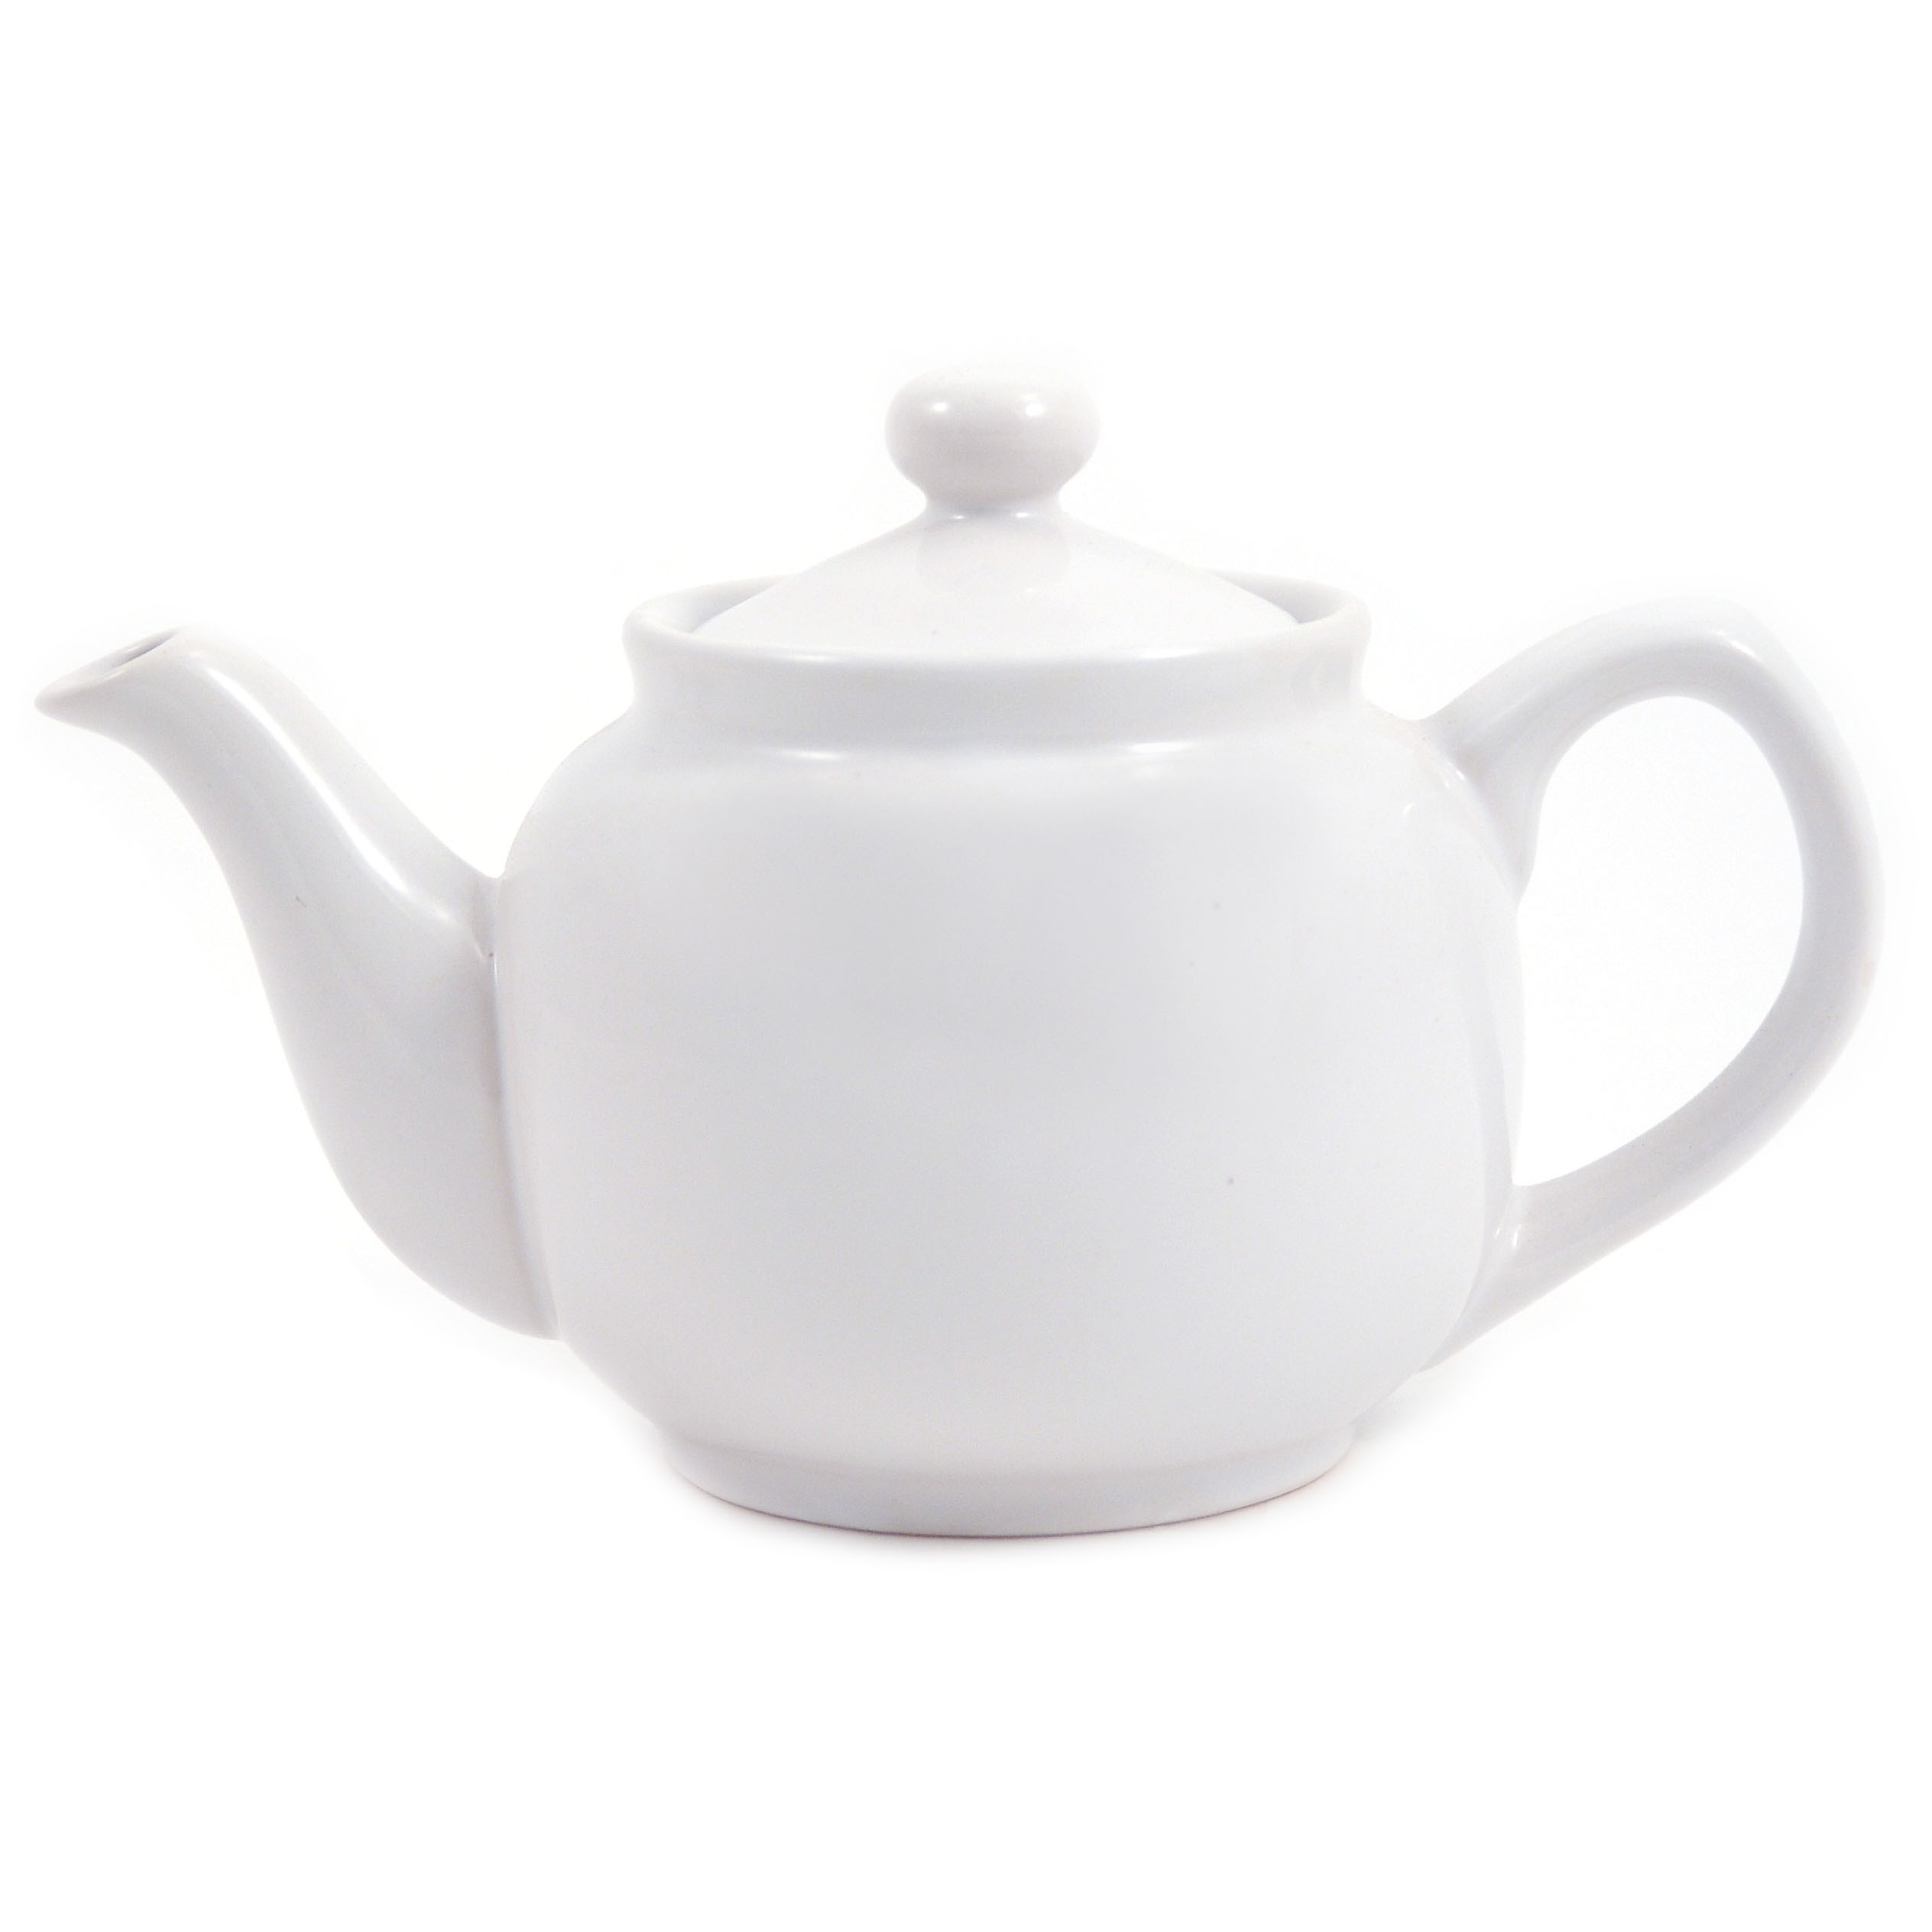 Amsterdam 2 Cup Teapot - White - Pack Size Option